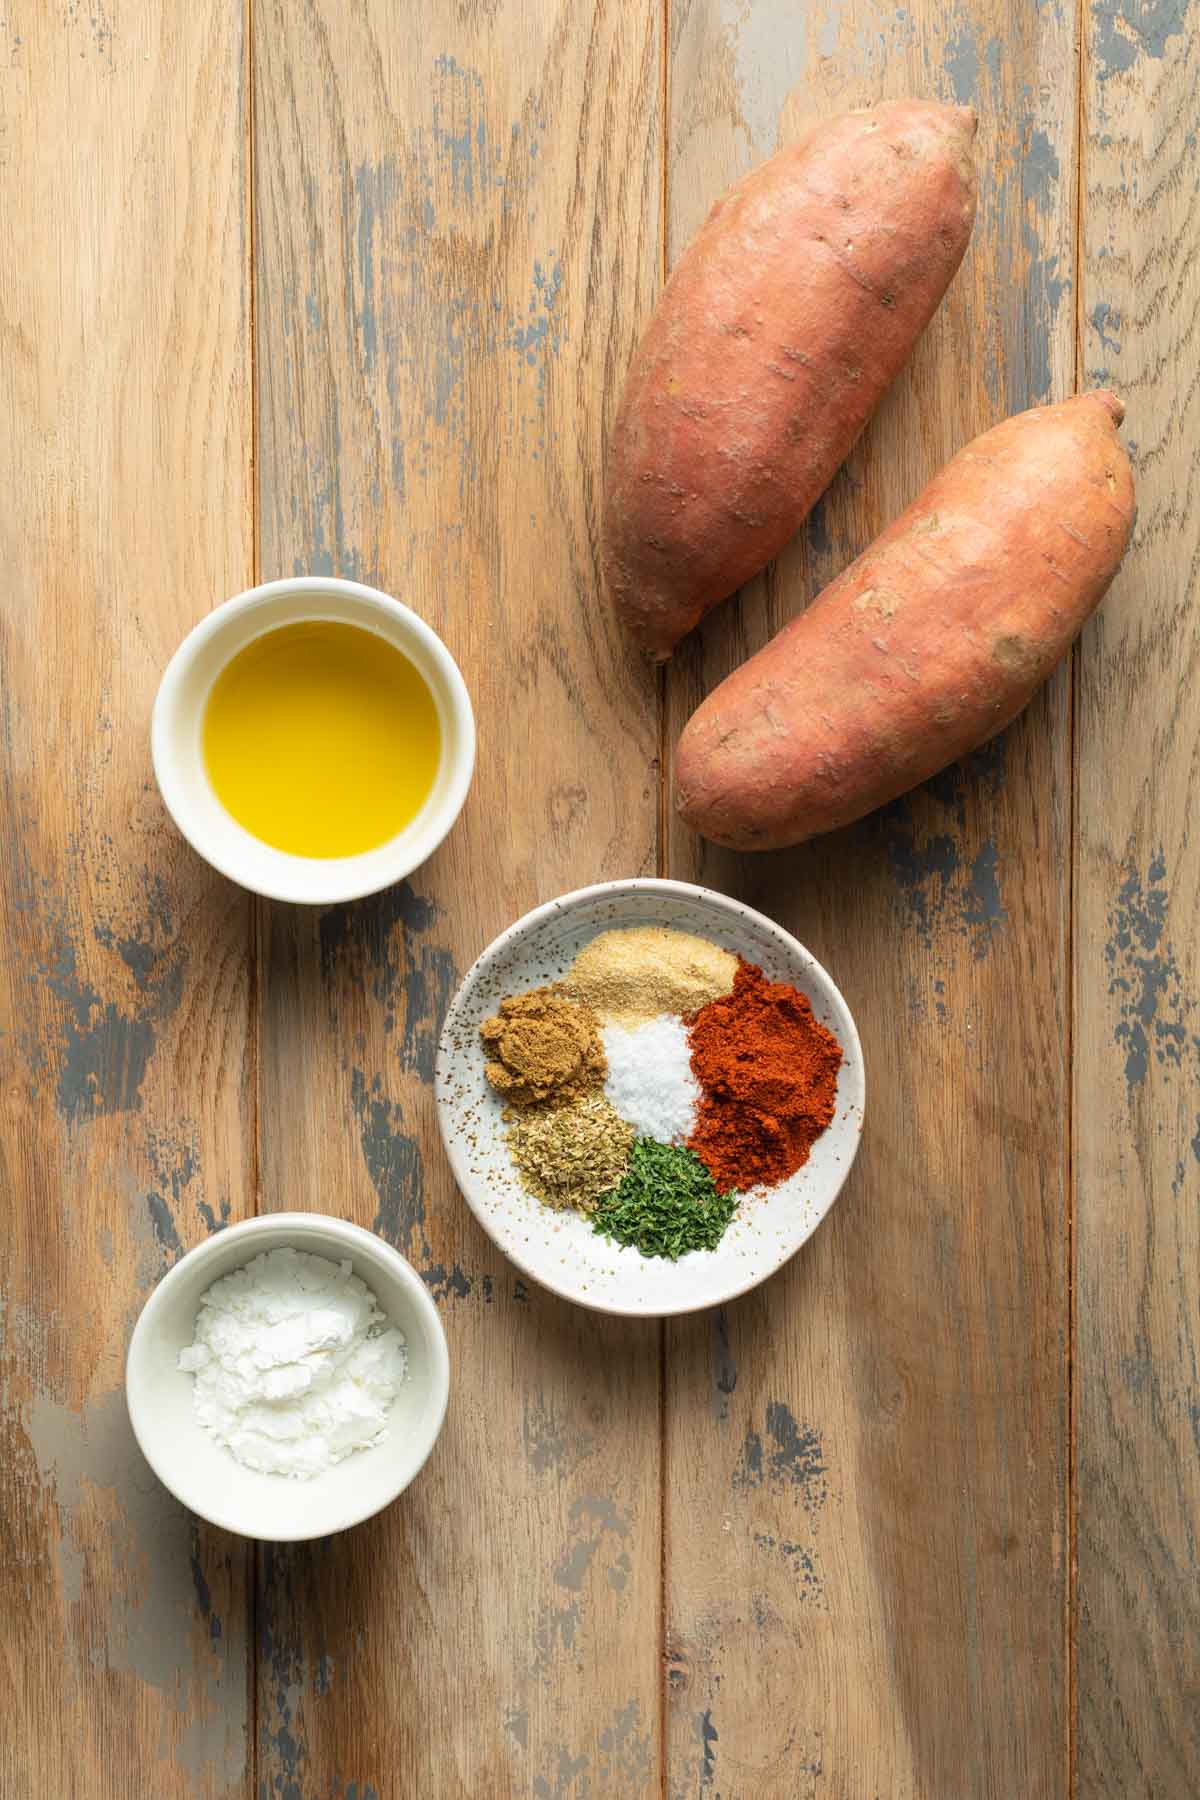 Ingredients to make air fryer sweet potato wedges arranged individually on a wooden surface.